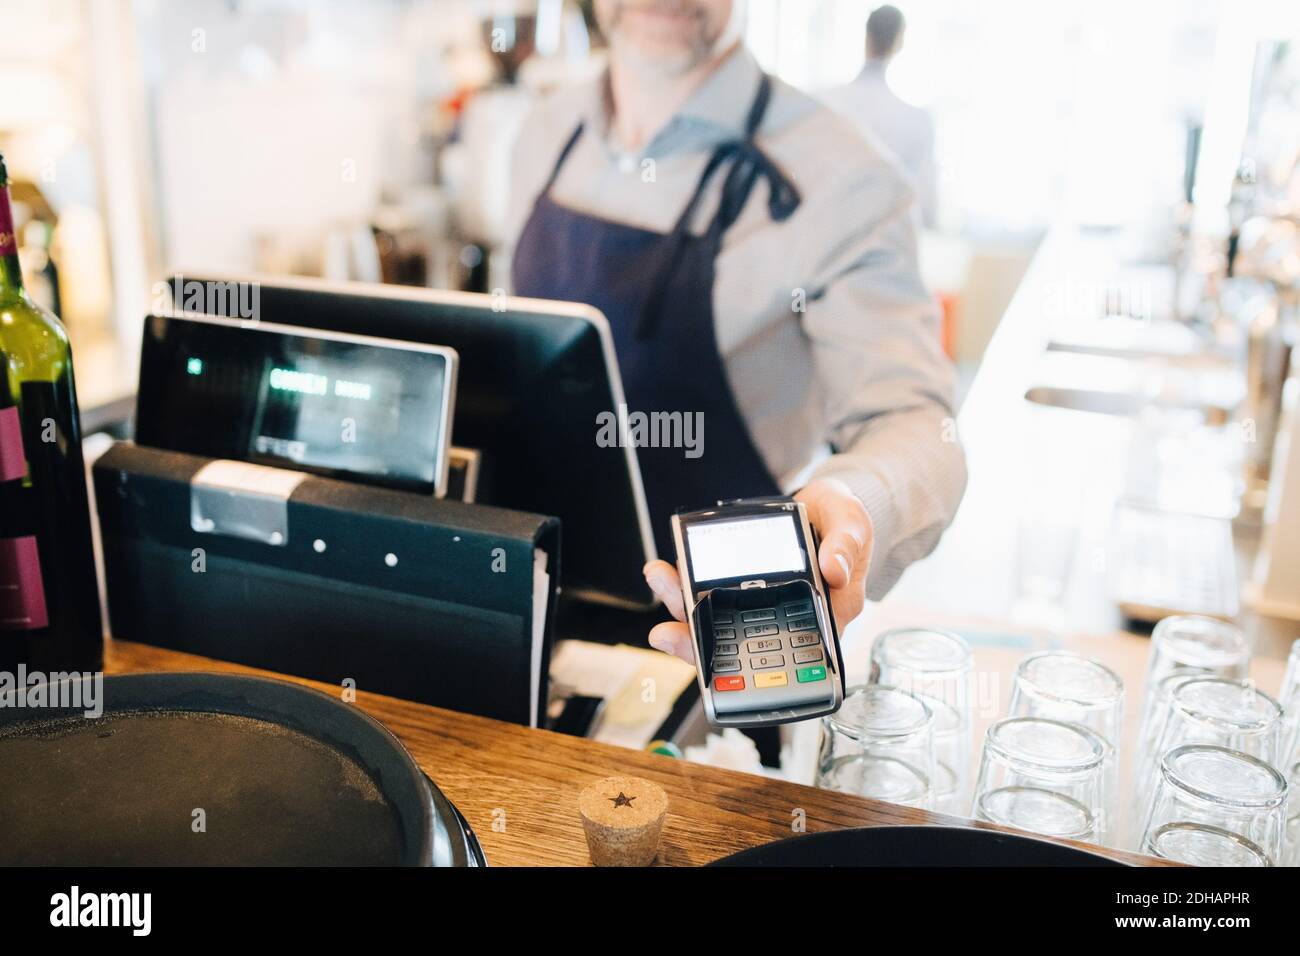 Midsection of man holding credit card reader in restaurant Stock Photo